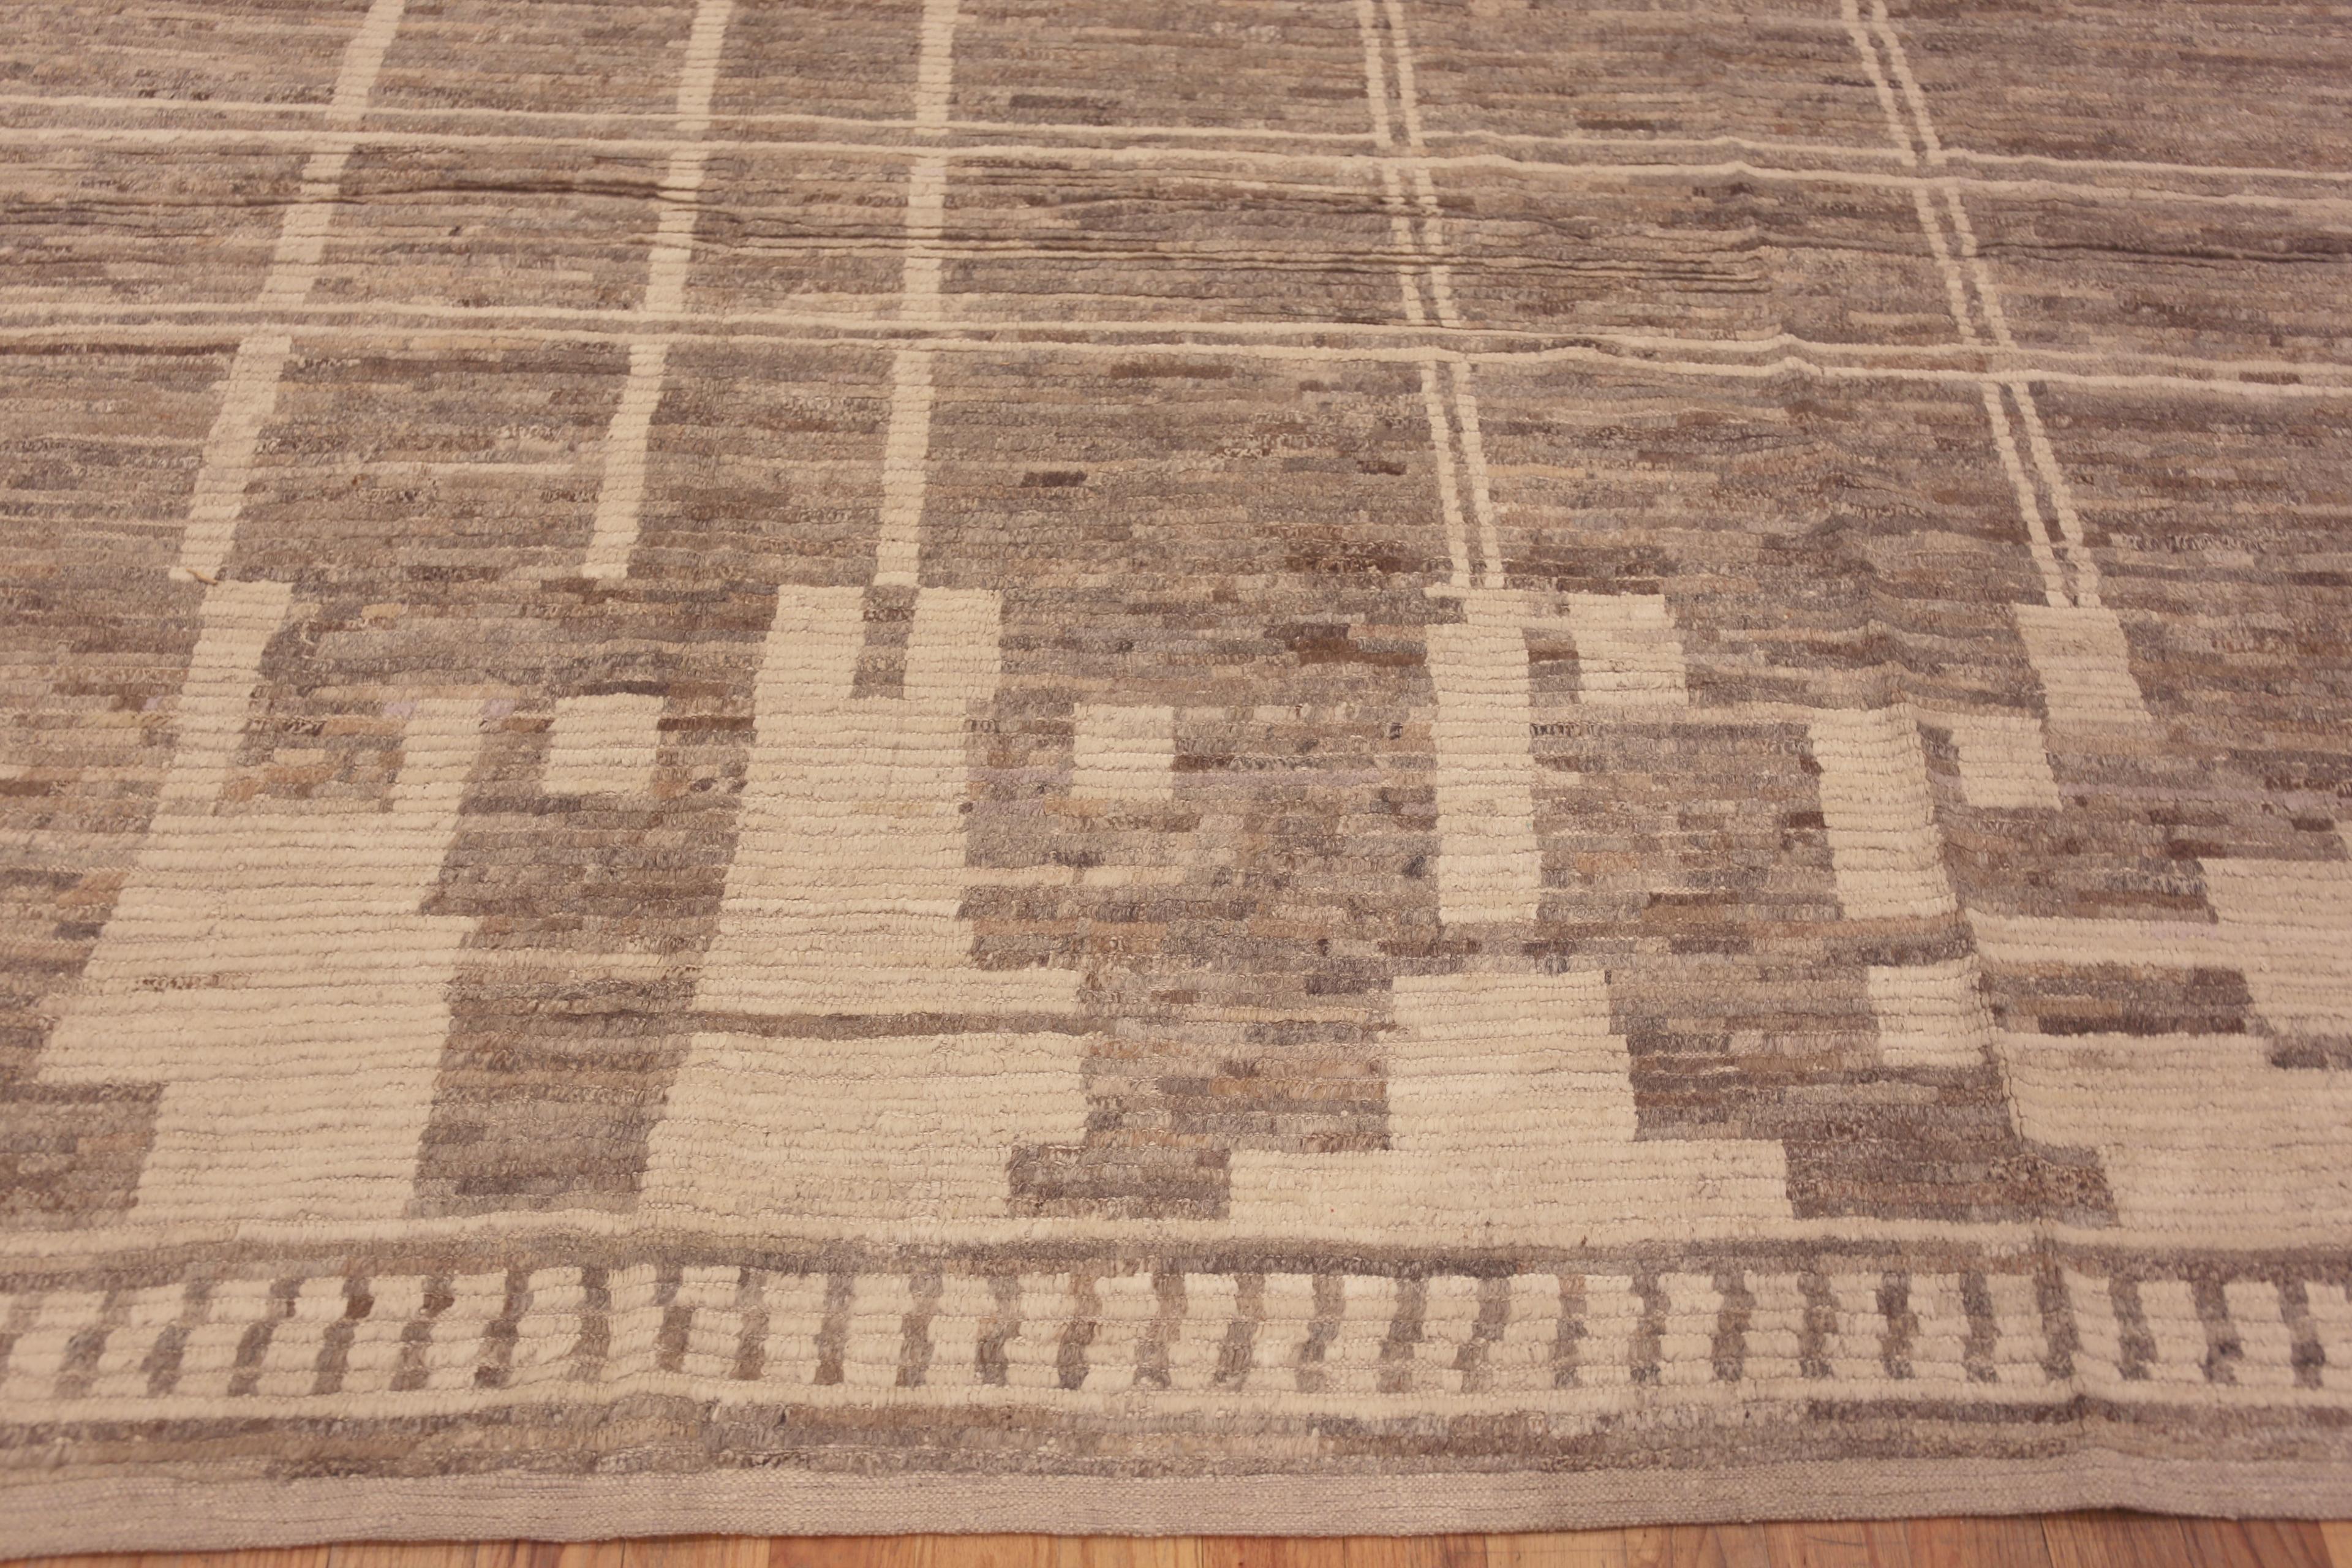 Collection Nazmiyal grande taille gris terreux tribal moderne 13' x 15' Neuf - En vente à New York, NY